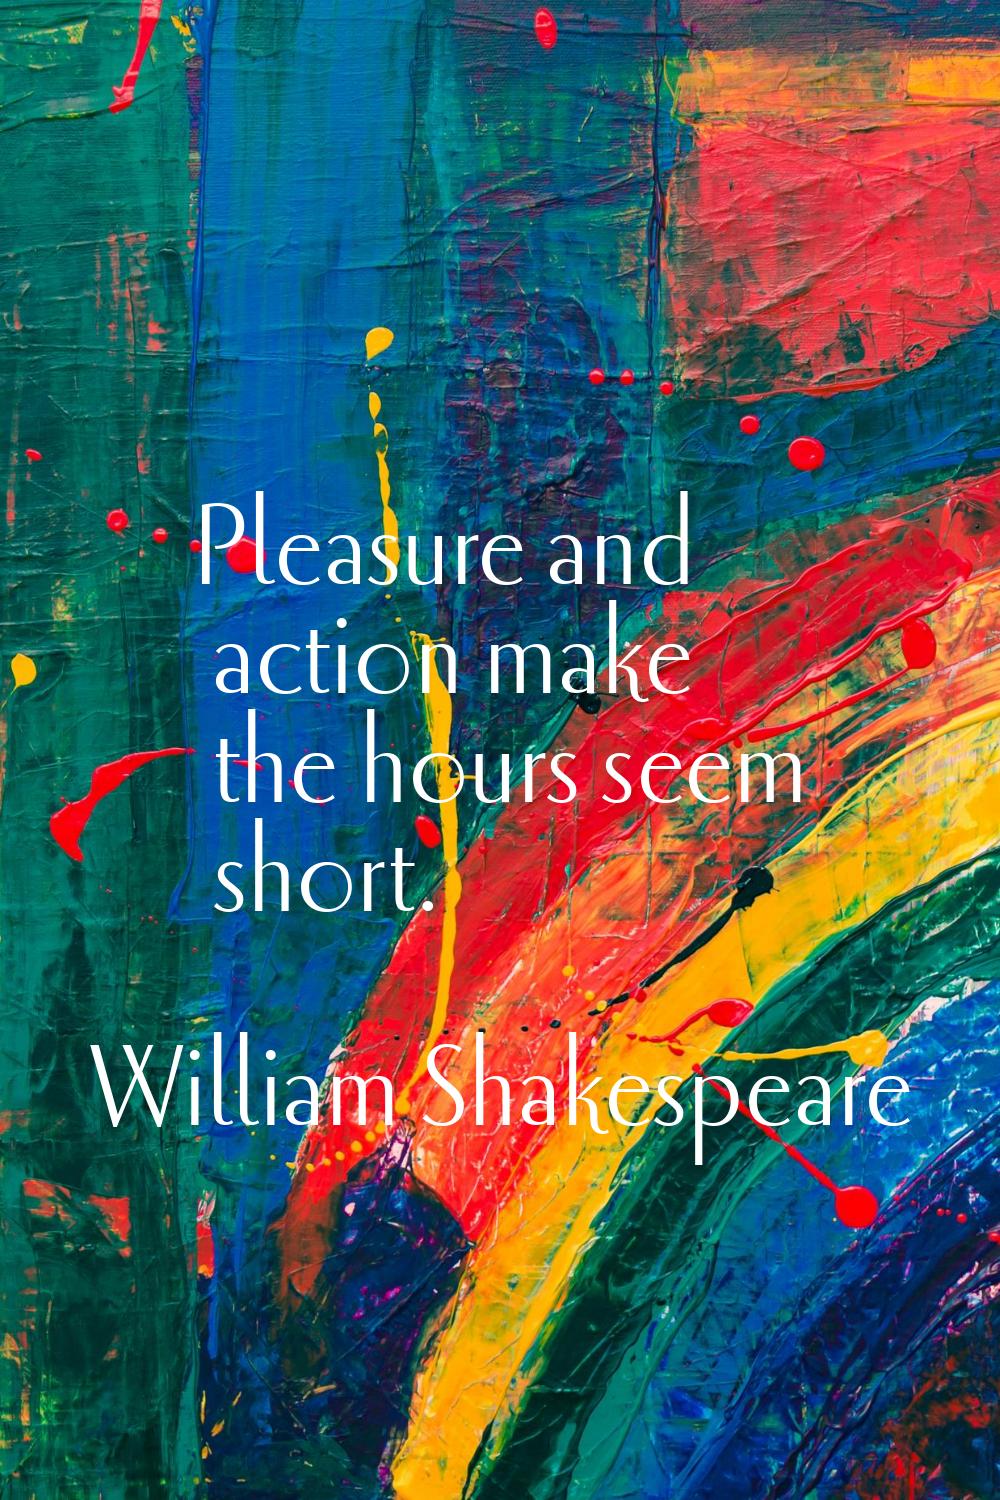 Pleasure and action make the hours seem short.